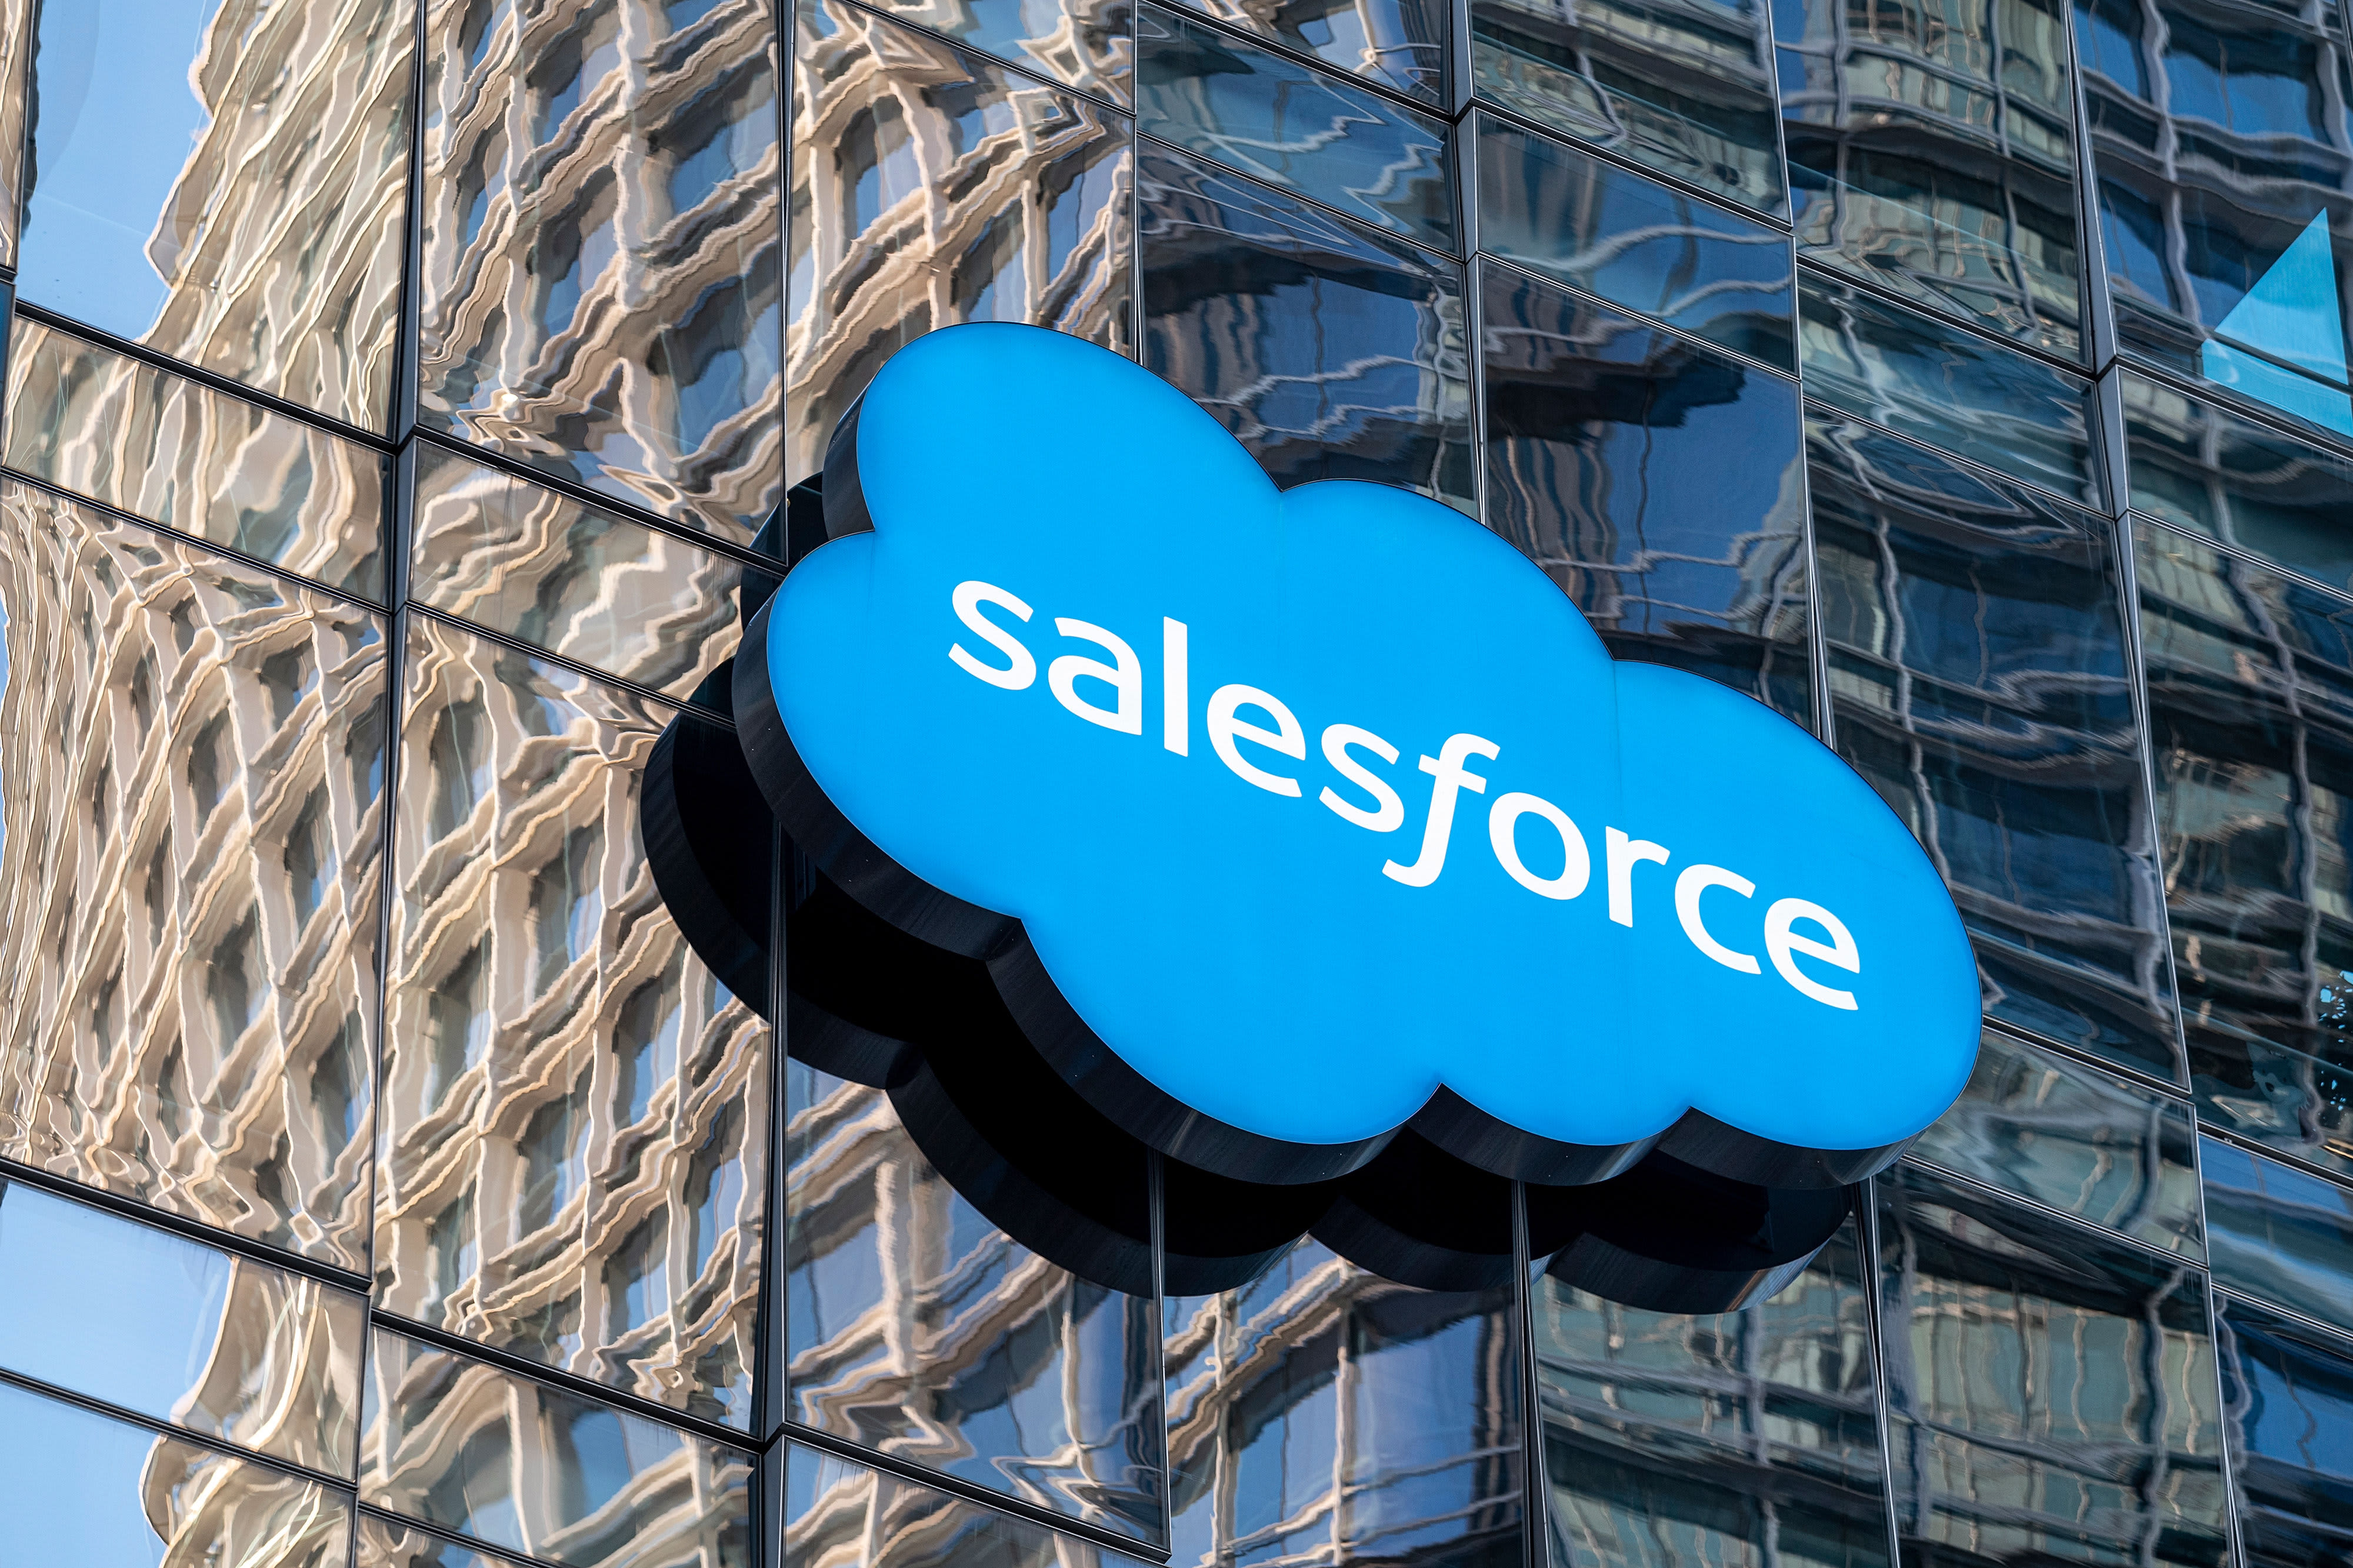 Facing growing calls for reform, Salesforce could use some fresh faces on its board